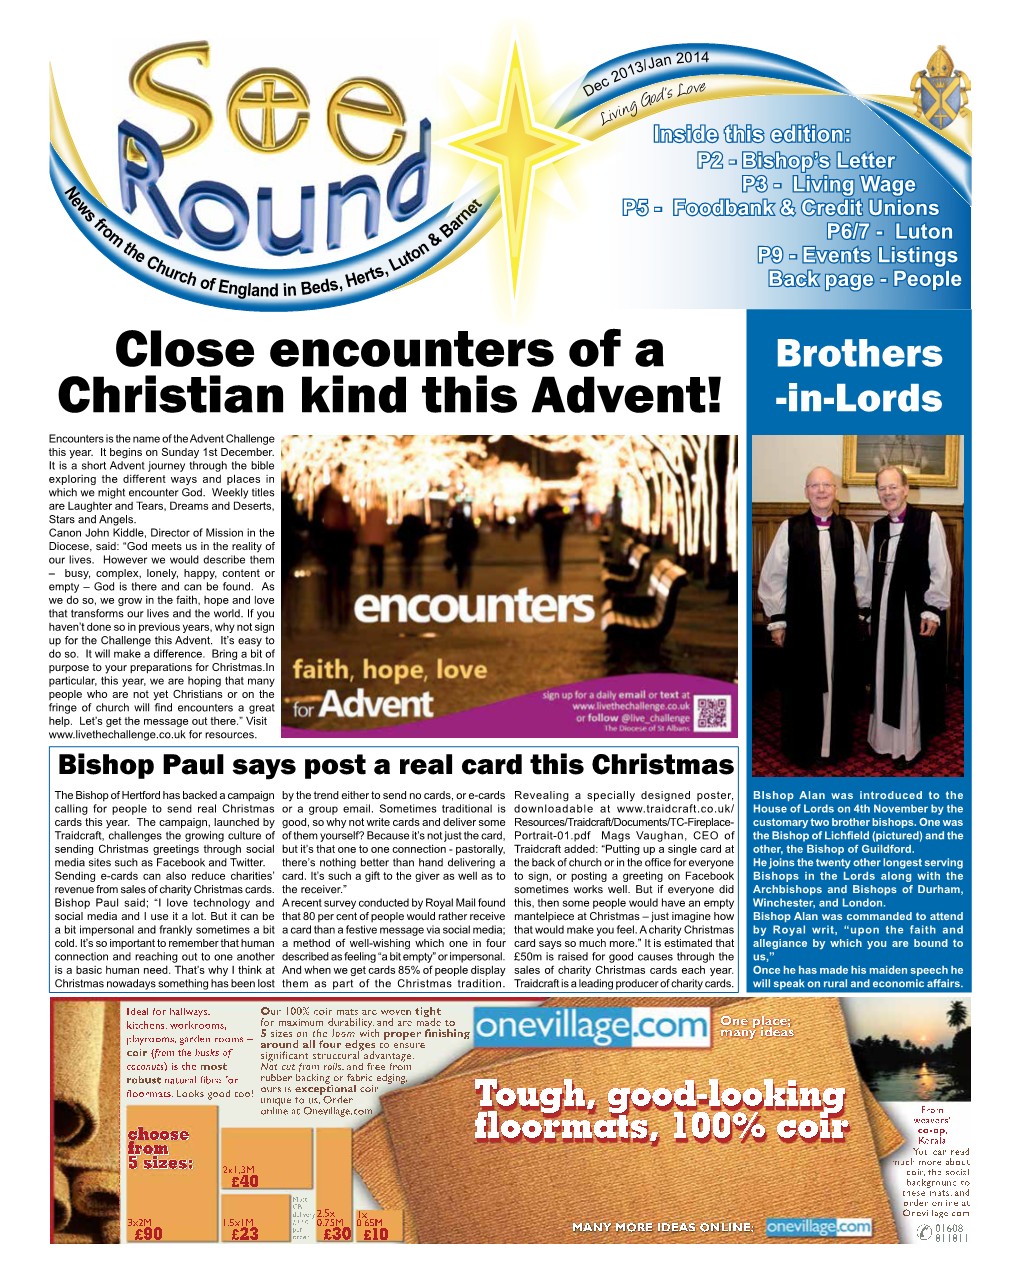 Close Encounters of a Christian Kind This Advent!